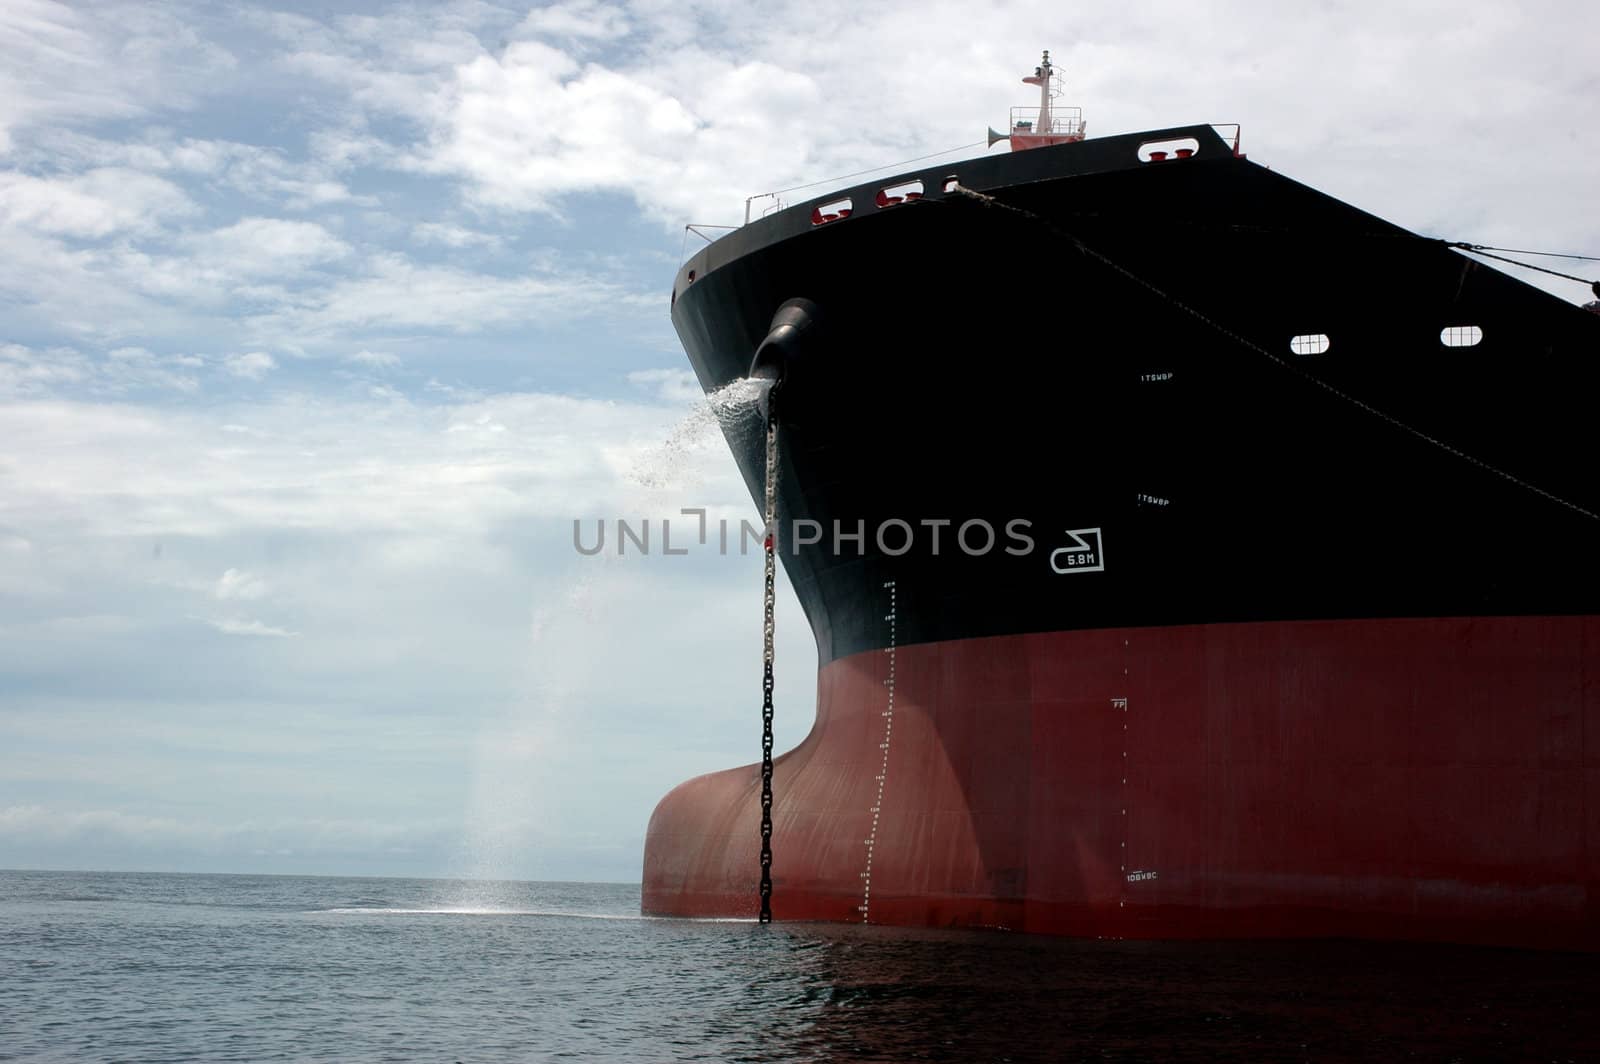 the bow of a big tanker ship by antonihalim